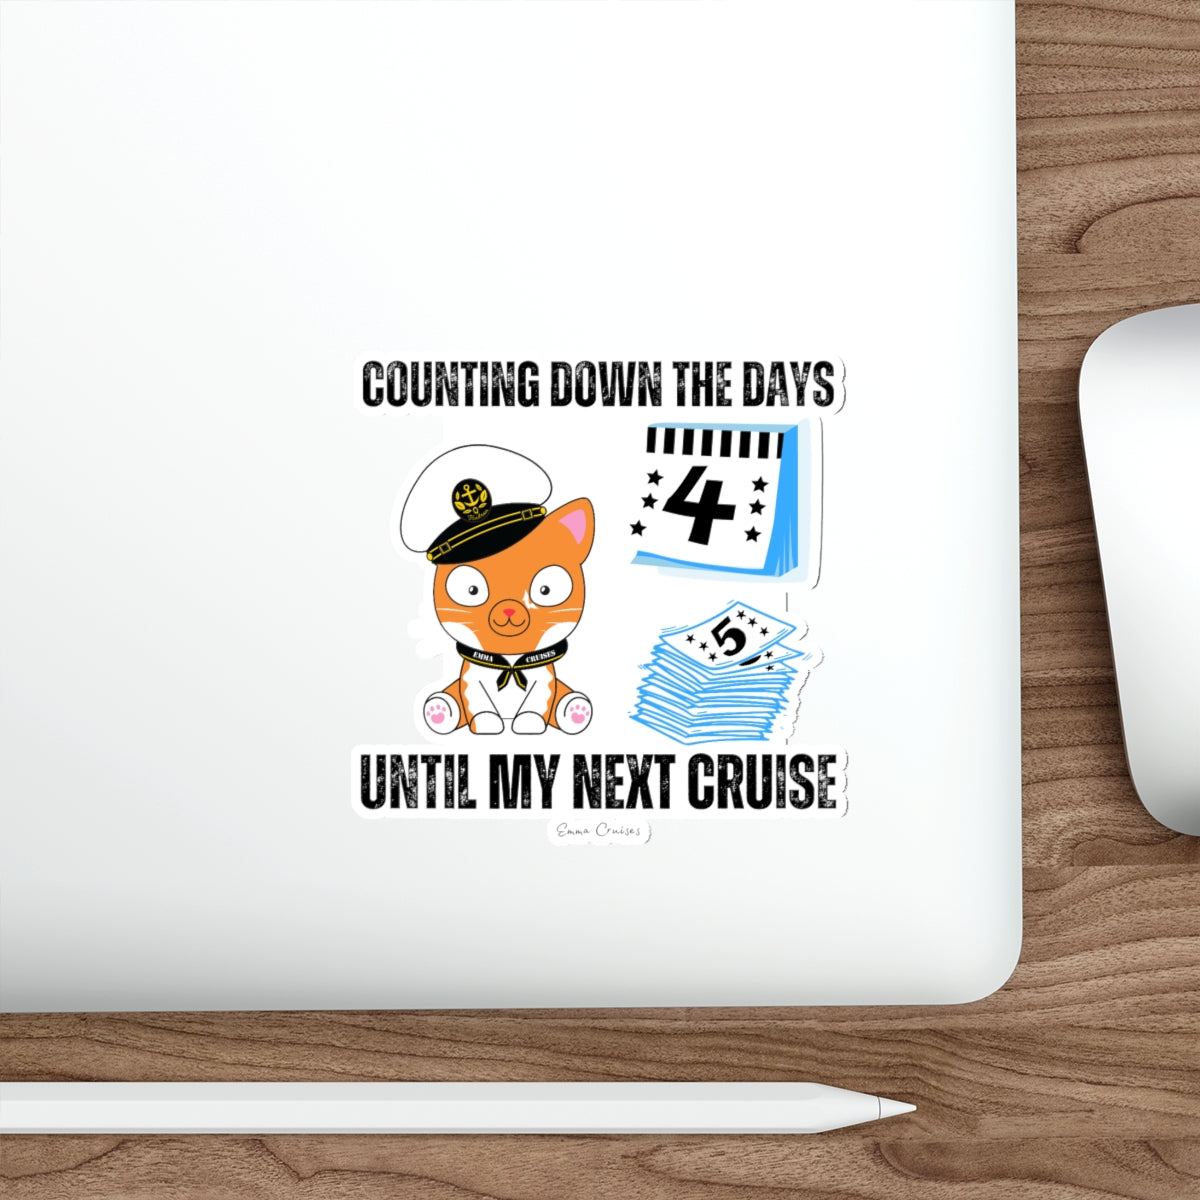 Counting Down the Days - Die-Cut Sticker